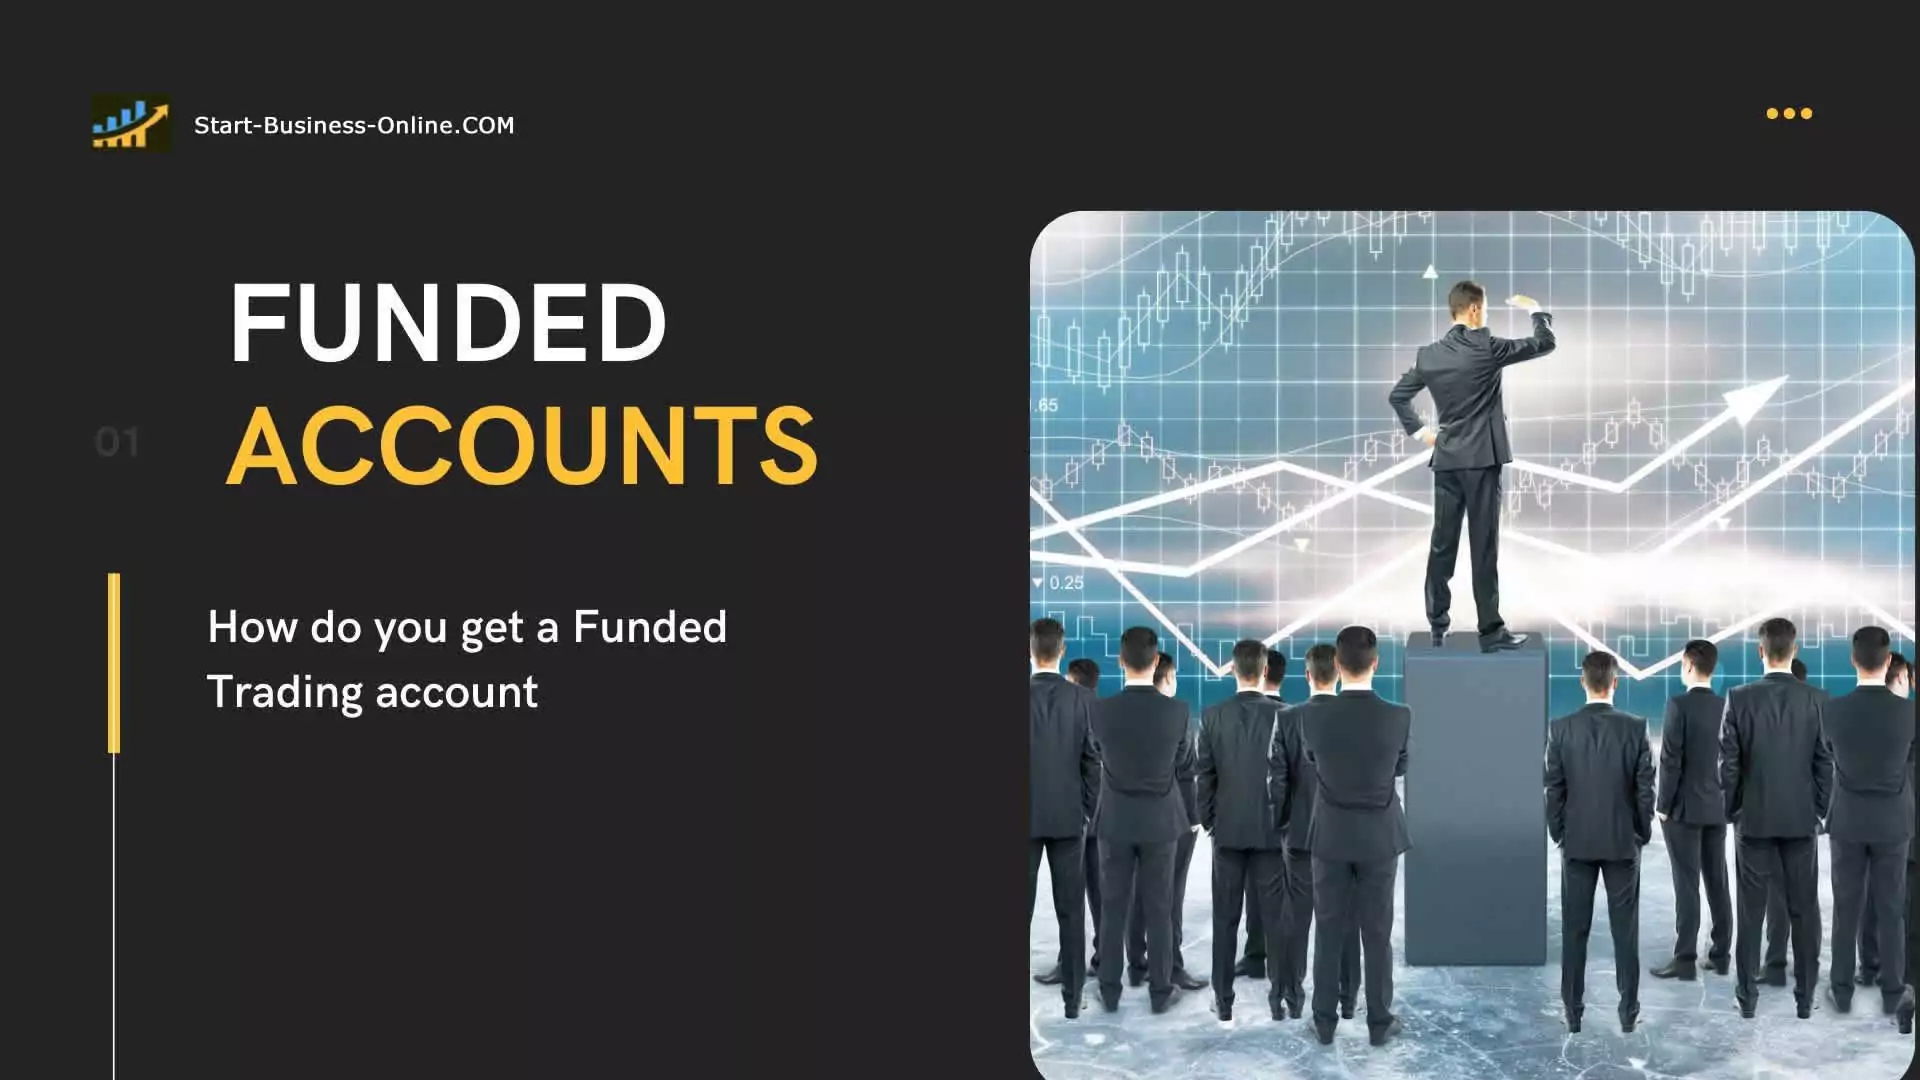 How do you get a Funded Trading account